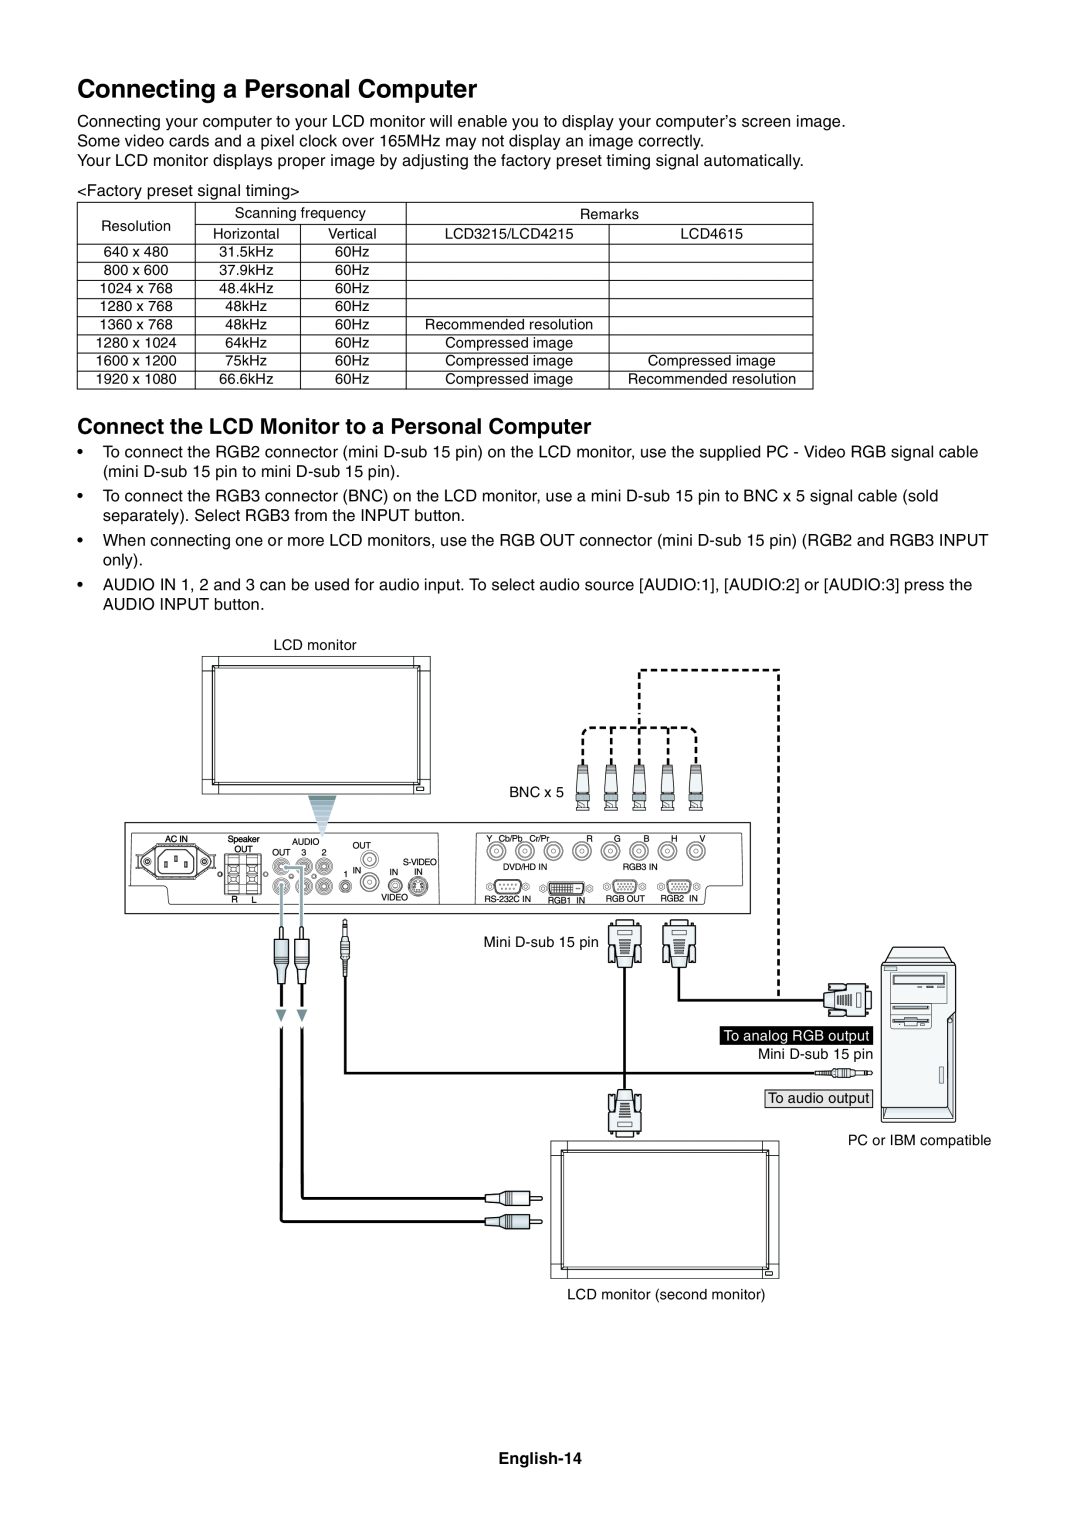 NEC LCD4615 user manual Connecting a Personal Computer, Connect the LCD Monitor to a Personal Computer 